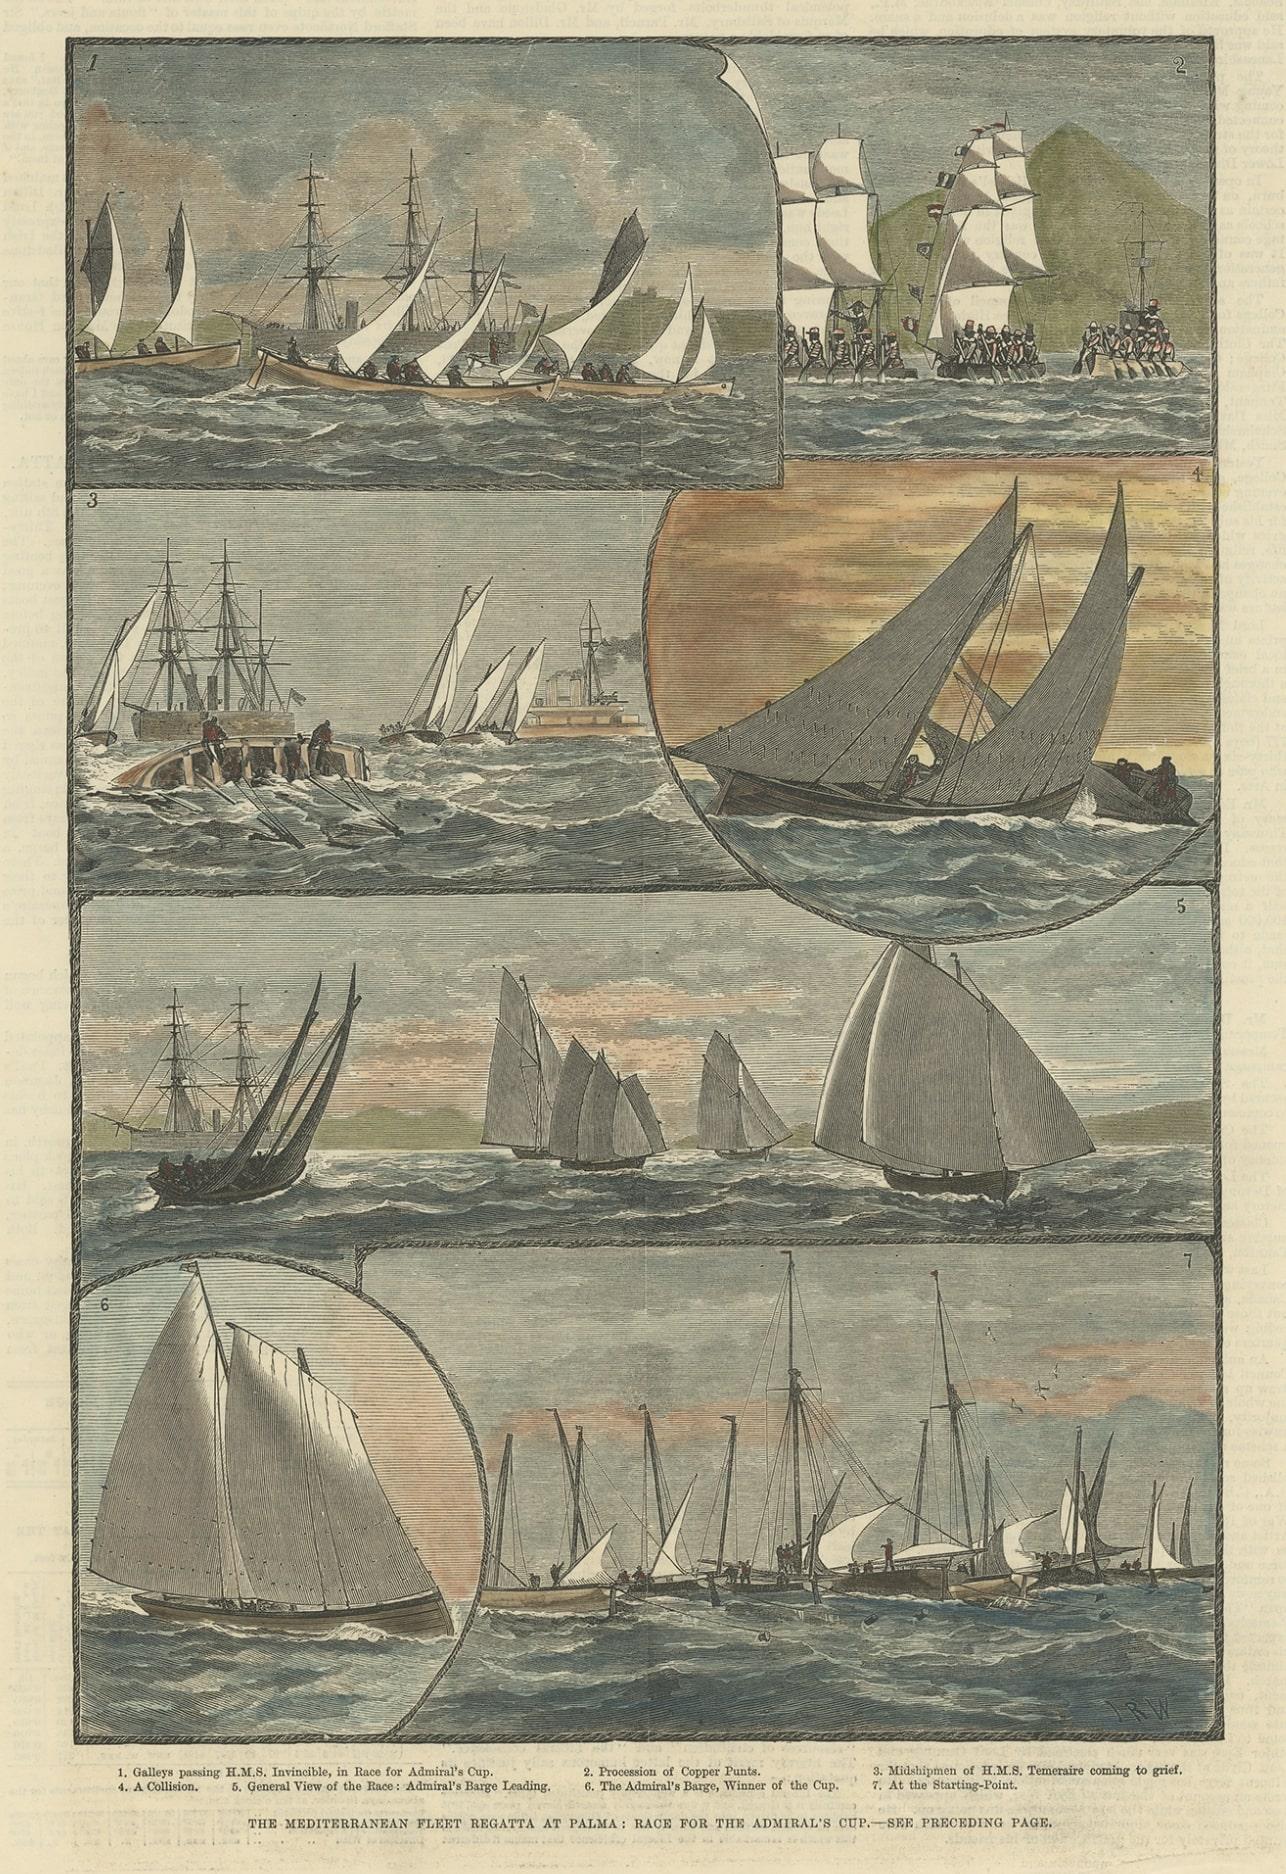 Antique print titled 'The Mediterranean Fleet Regatta at Palma'. This print depicts the race for the Admiral's Cup.

Artists and Engravers: Published in The Illustrated London News.

Condition: Good, some toning and creasing. English text on